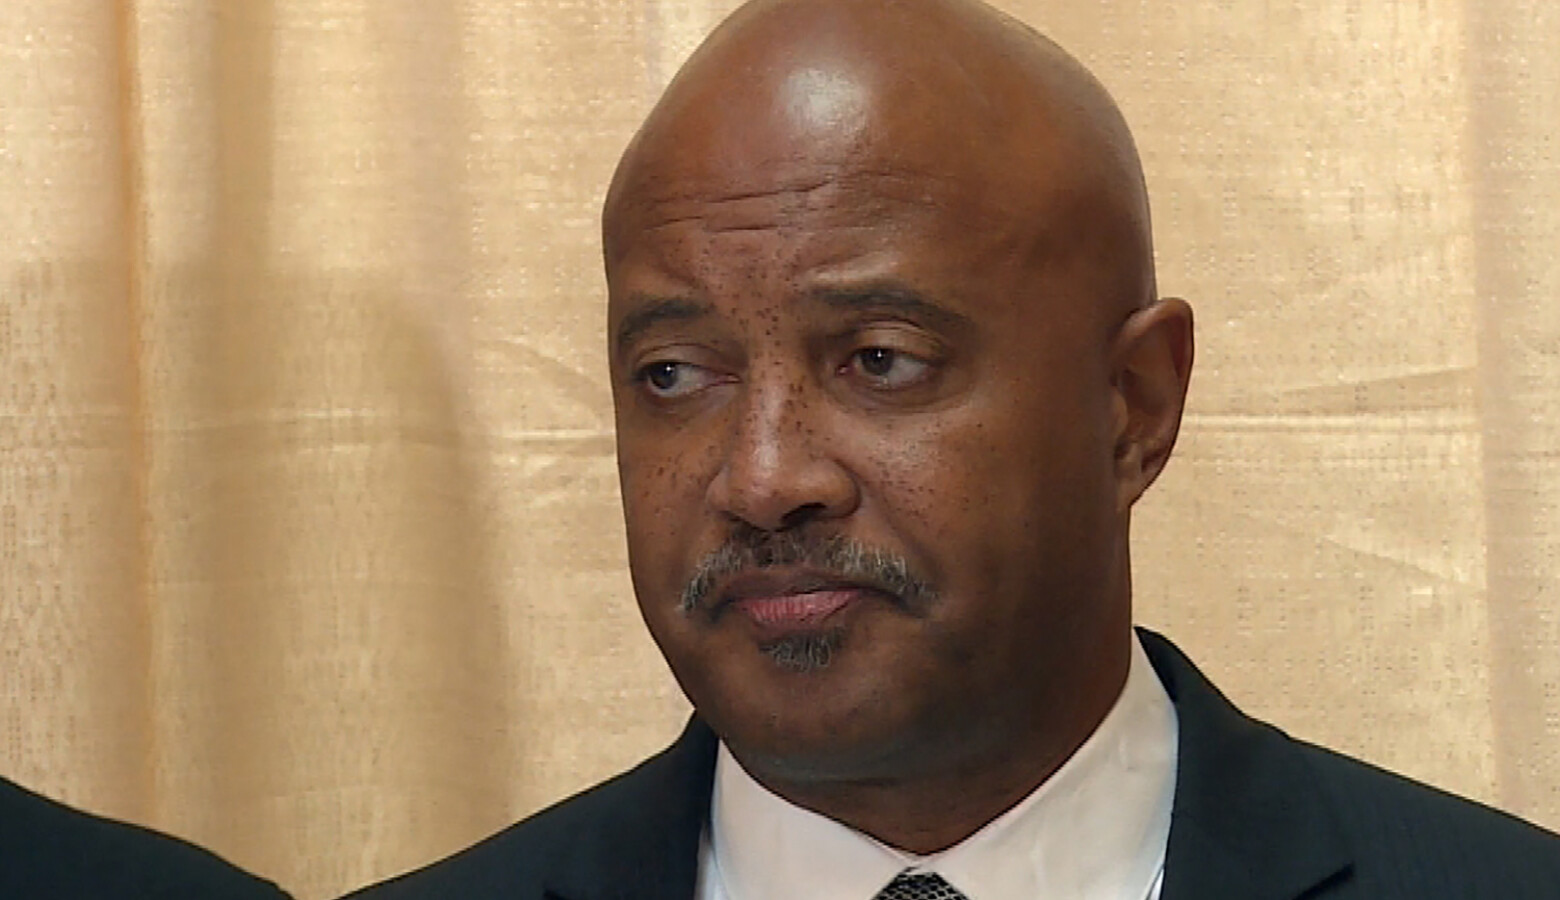 A disciplinary hearing officer says Attorney General Curtis Hill’s law license should be suspended for 60 days without automatic reinstatement after four women accused him of sexual misconduct. (FILE PHOTO: WFIU/WTIU)